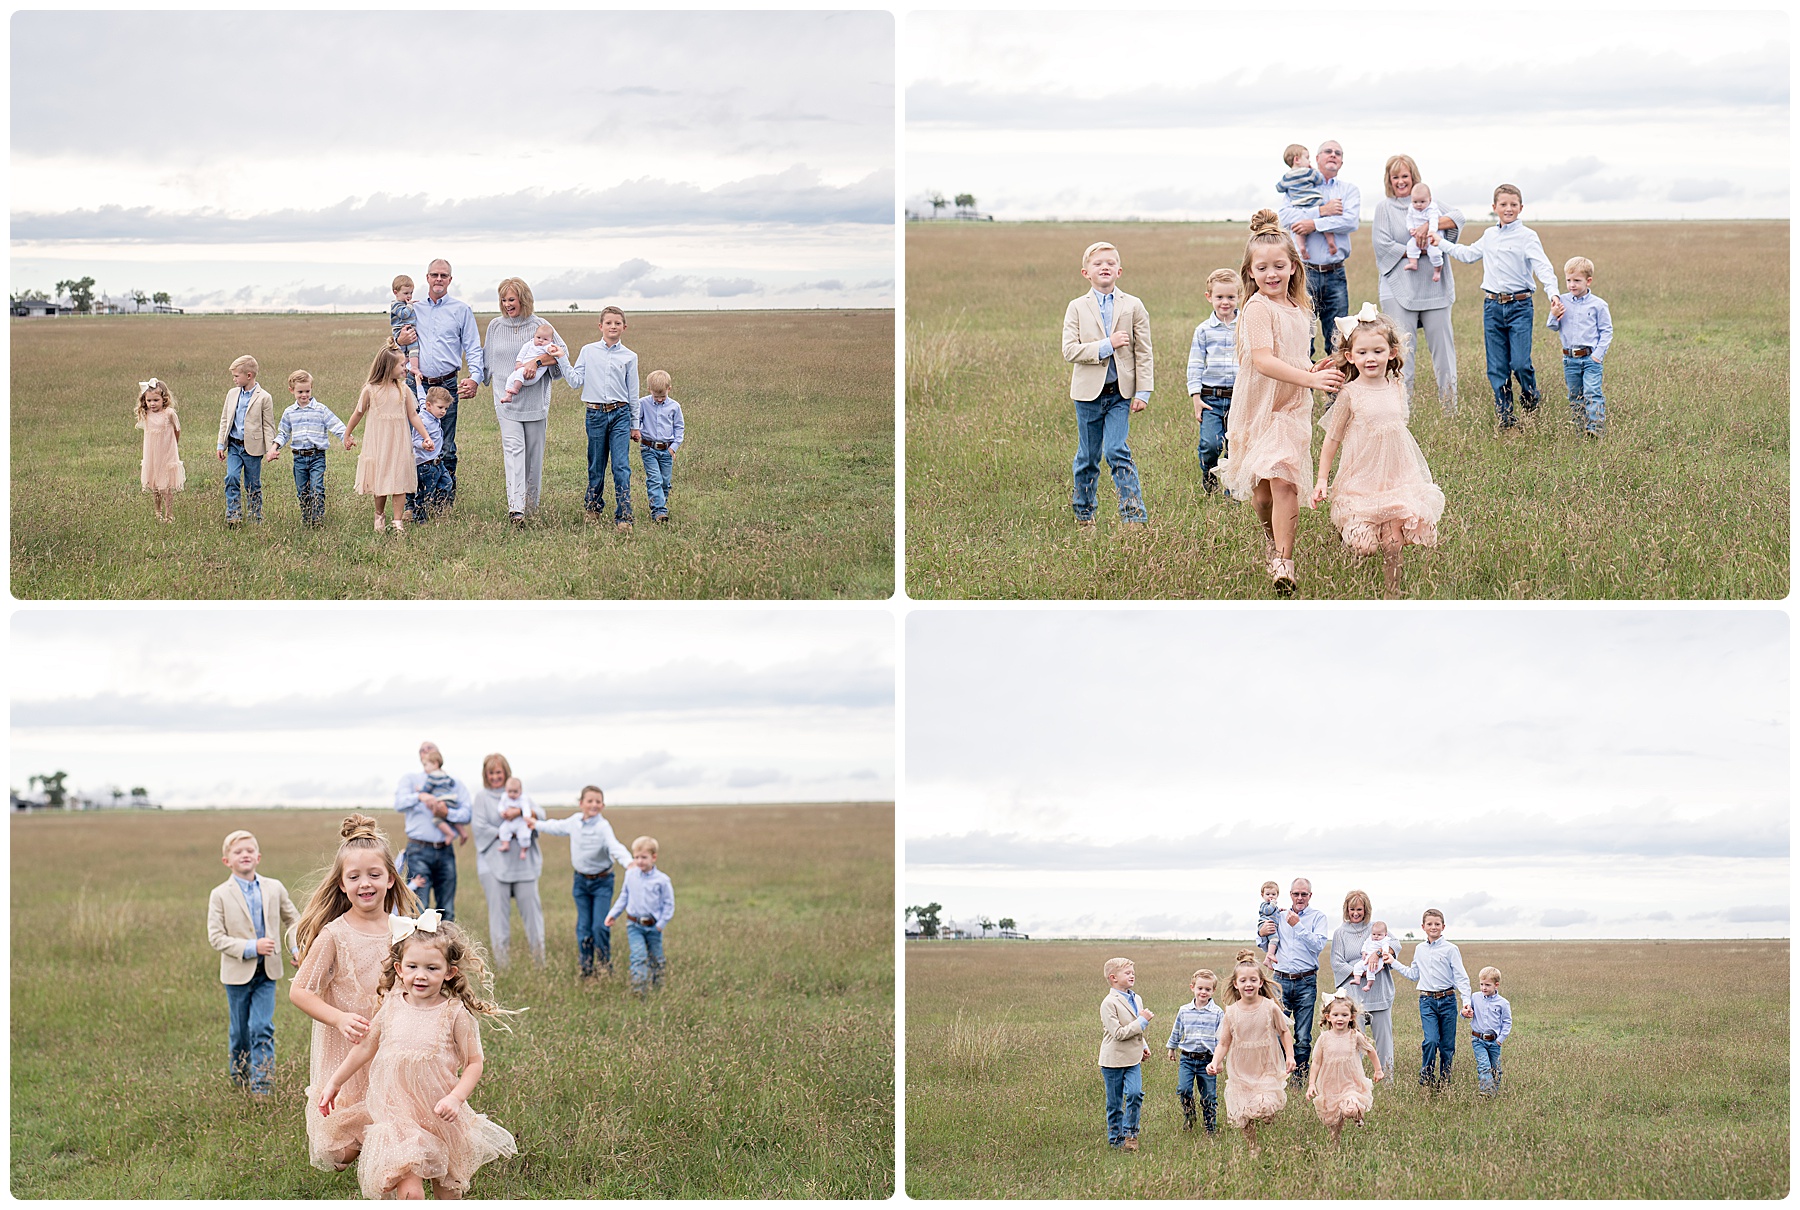 grandparents and all their grandkids running through a field